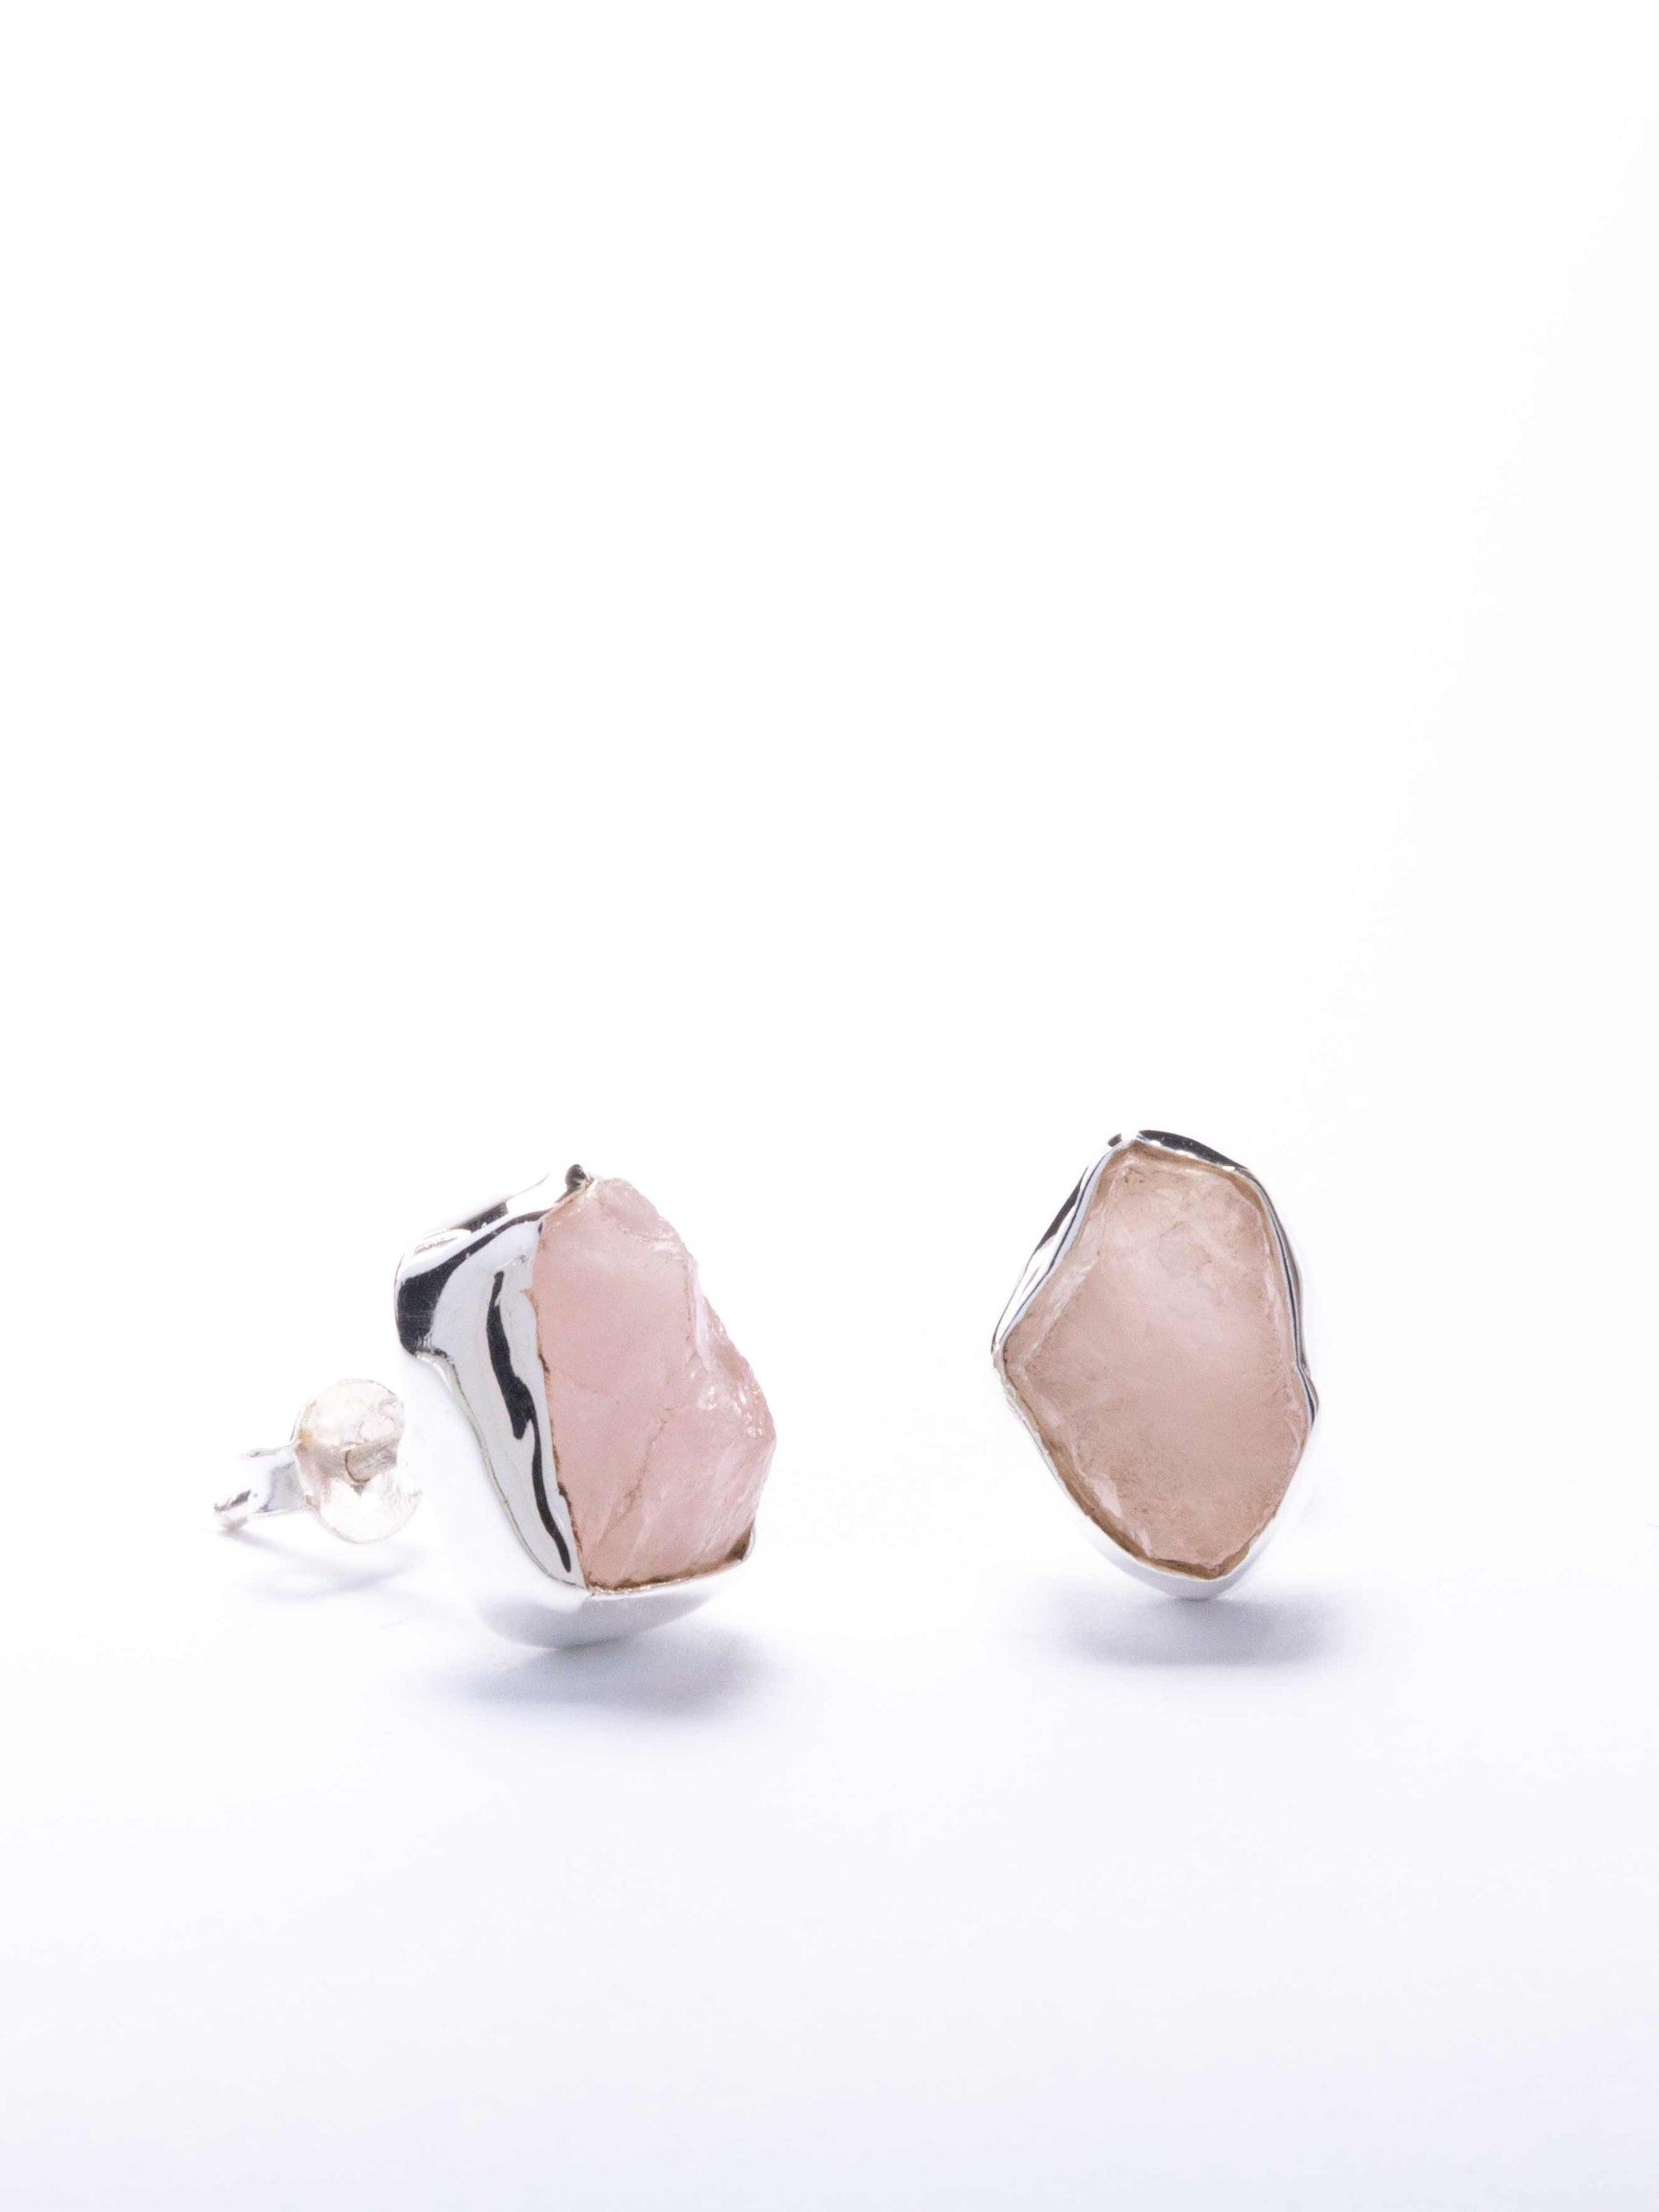 Silver Stud Earring with Rose Quartz